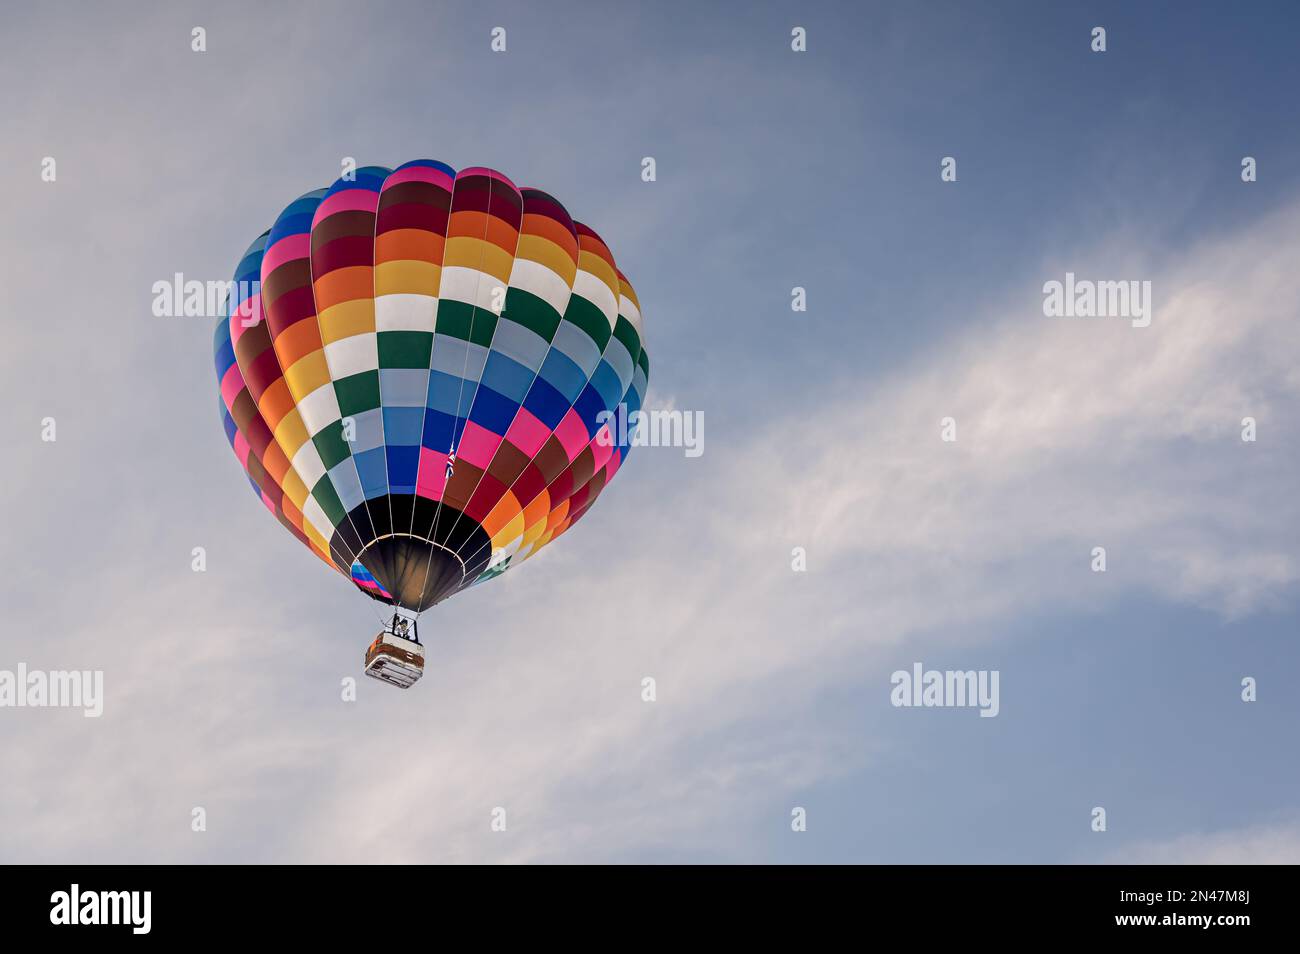 Hot Air Balloon in flight. One hot air ballooning flying in the sky in Switzerland. Chateau d'oex, Vaud, Switzerland. Stock Photo